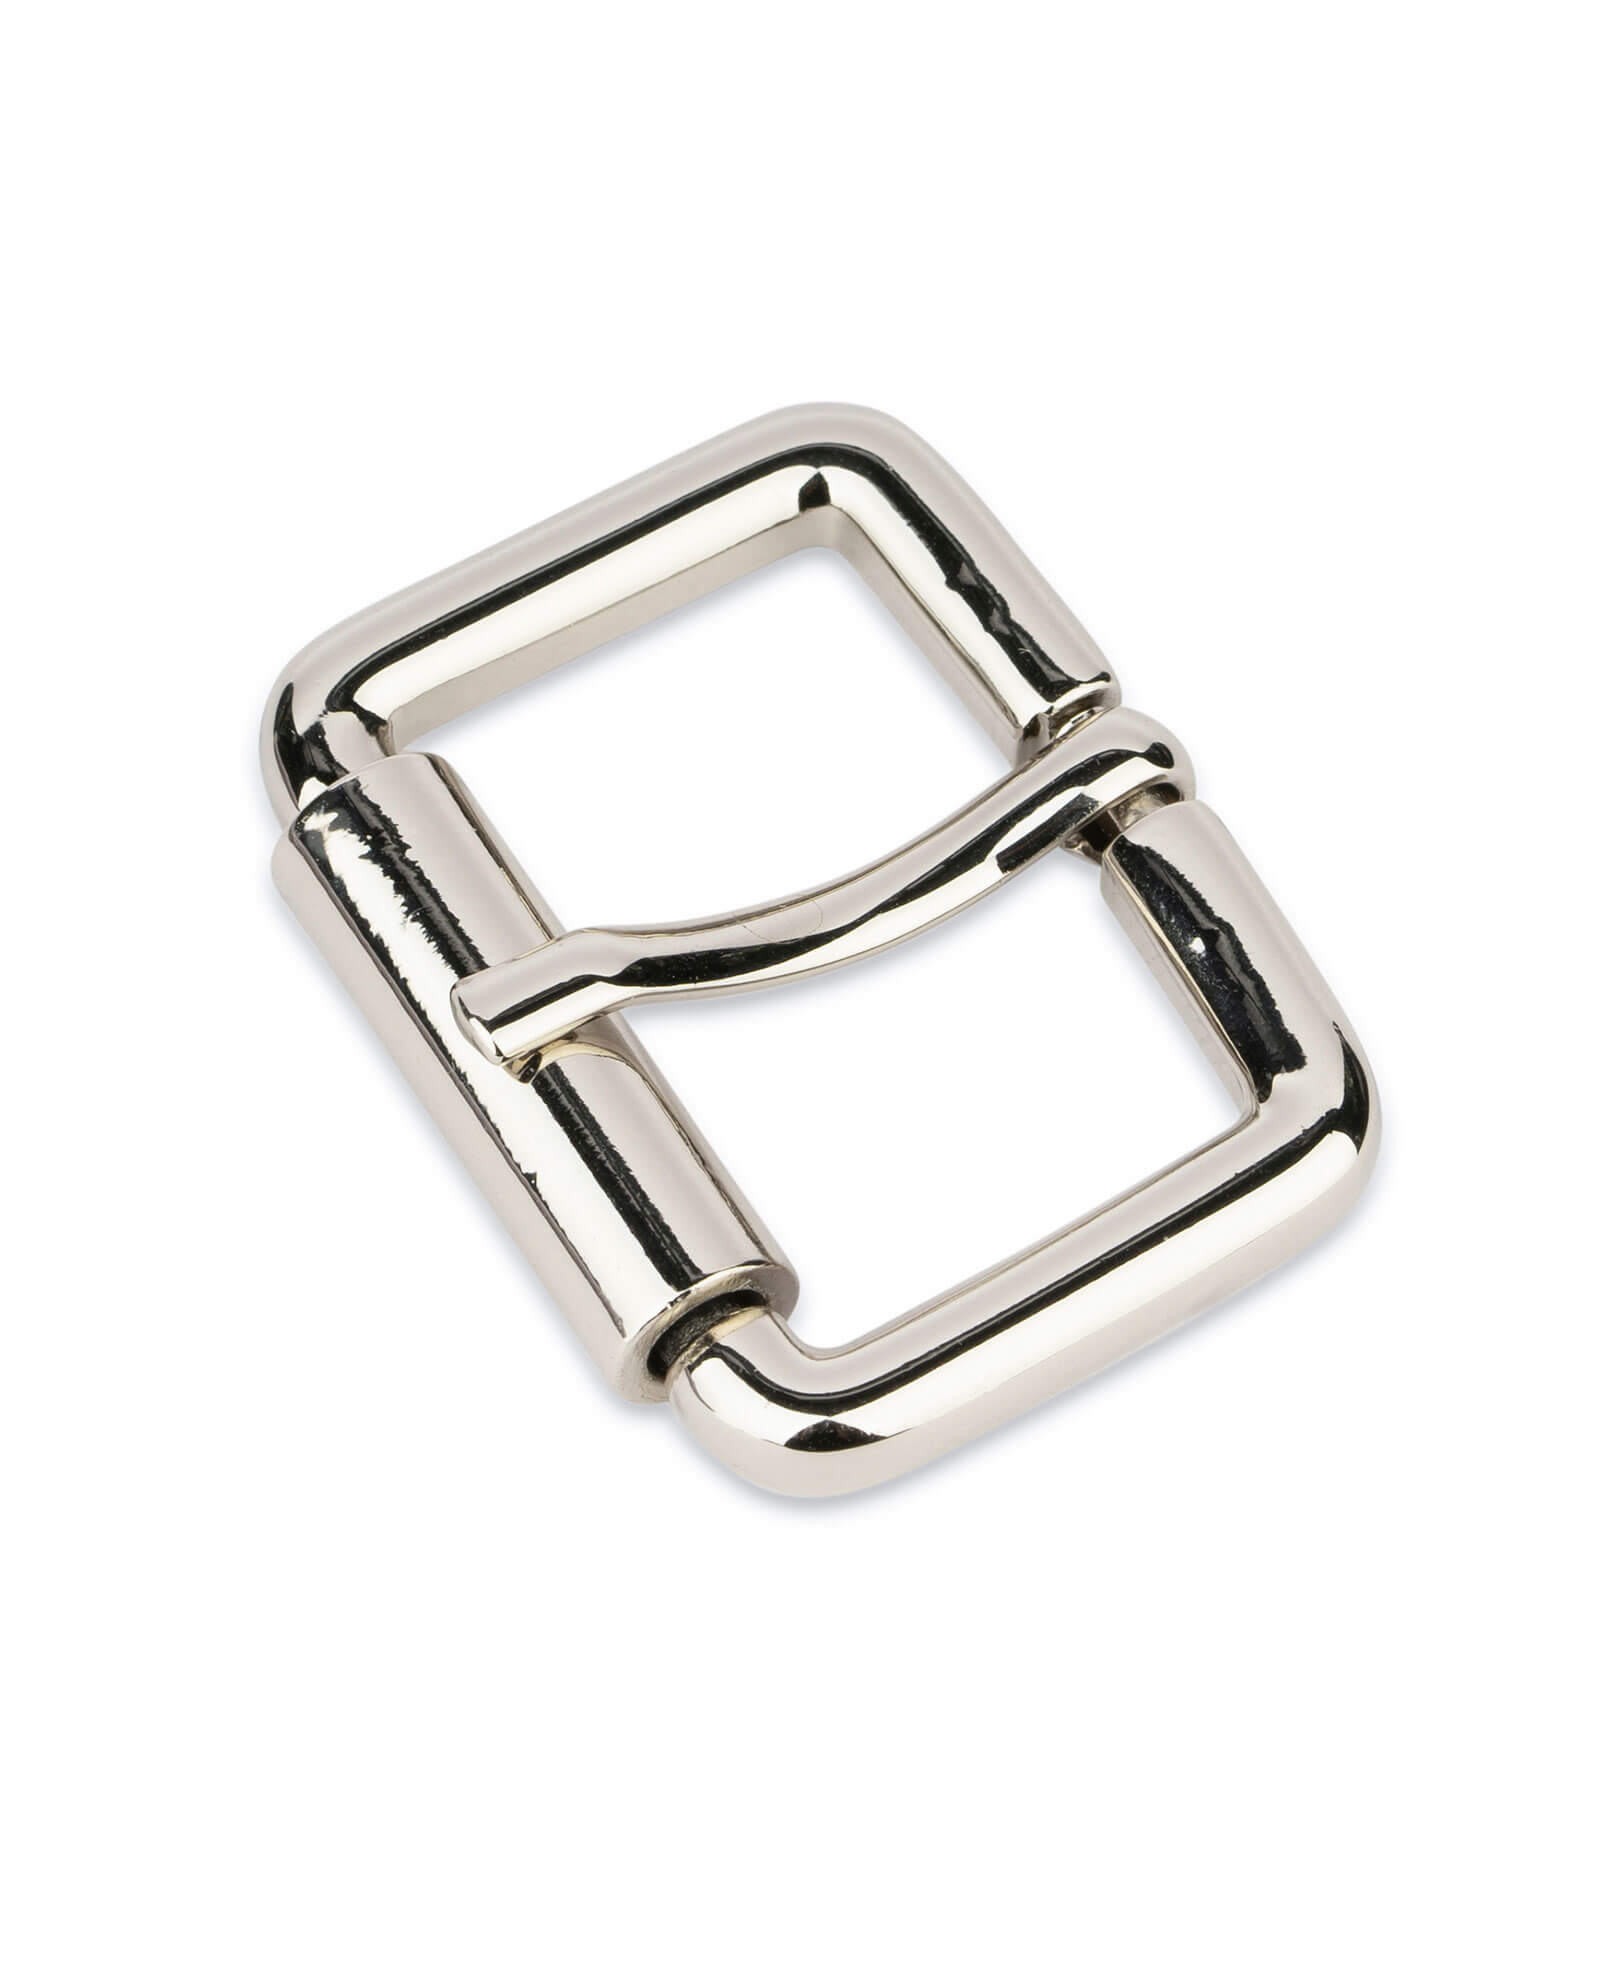 1" Stainless Steel Belt Buckle With Black Coating And Roller 